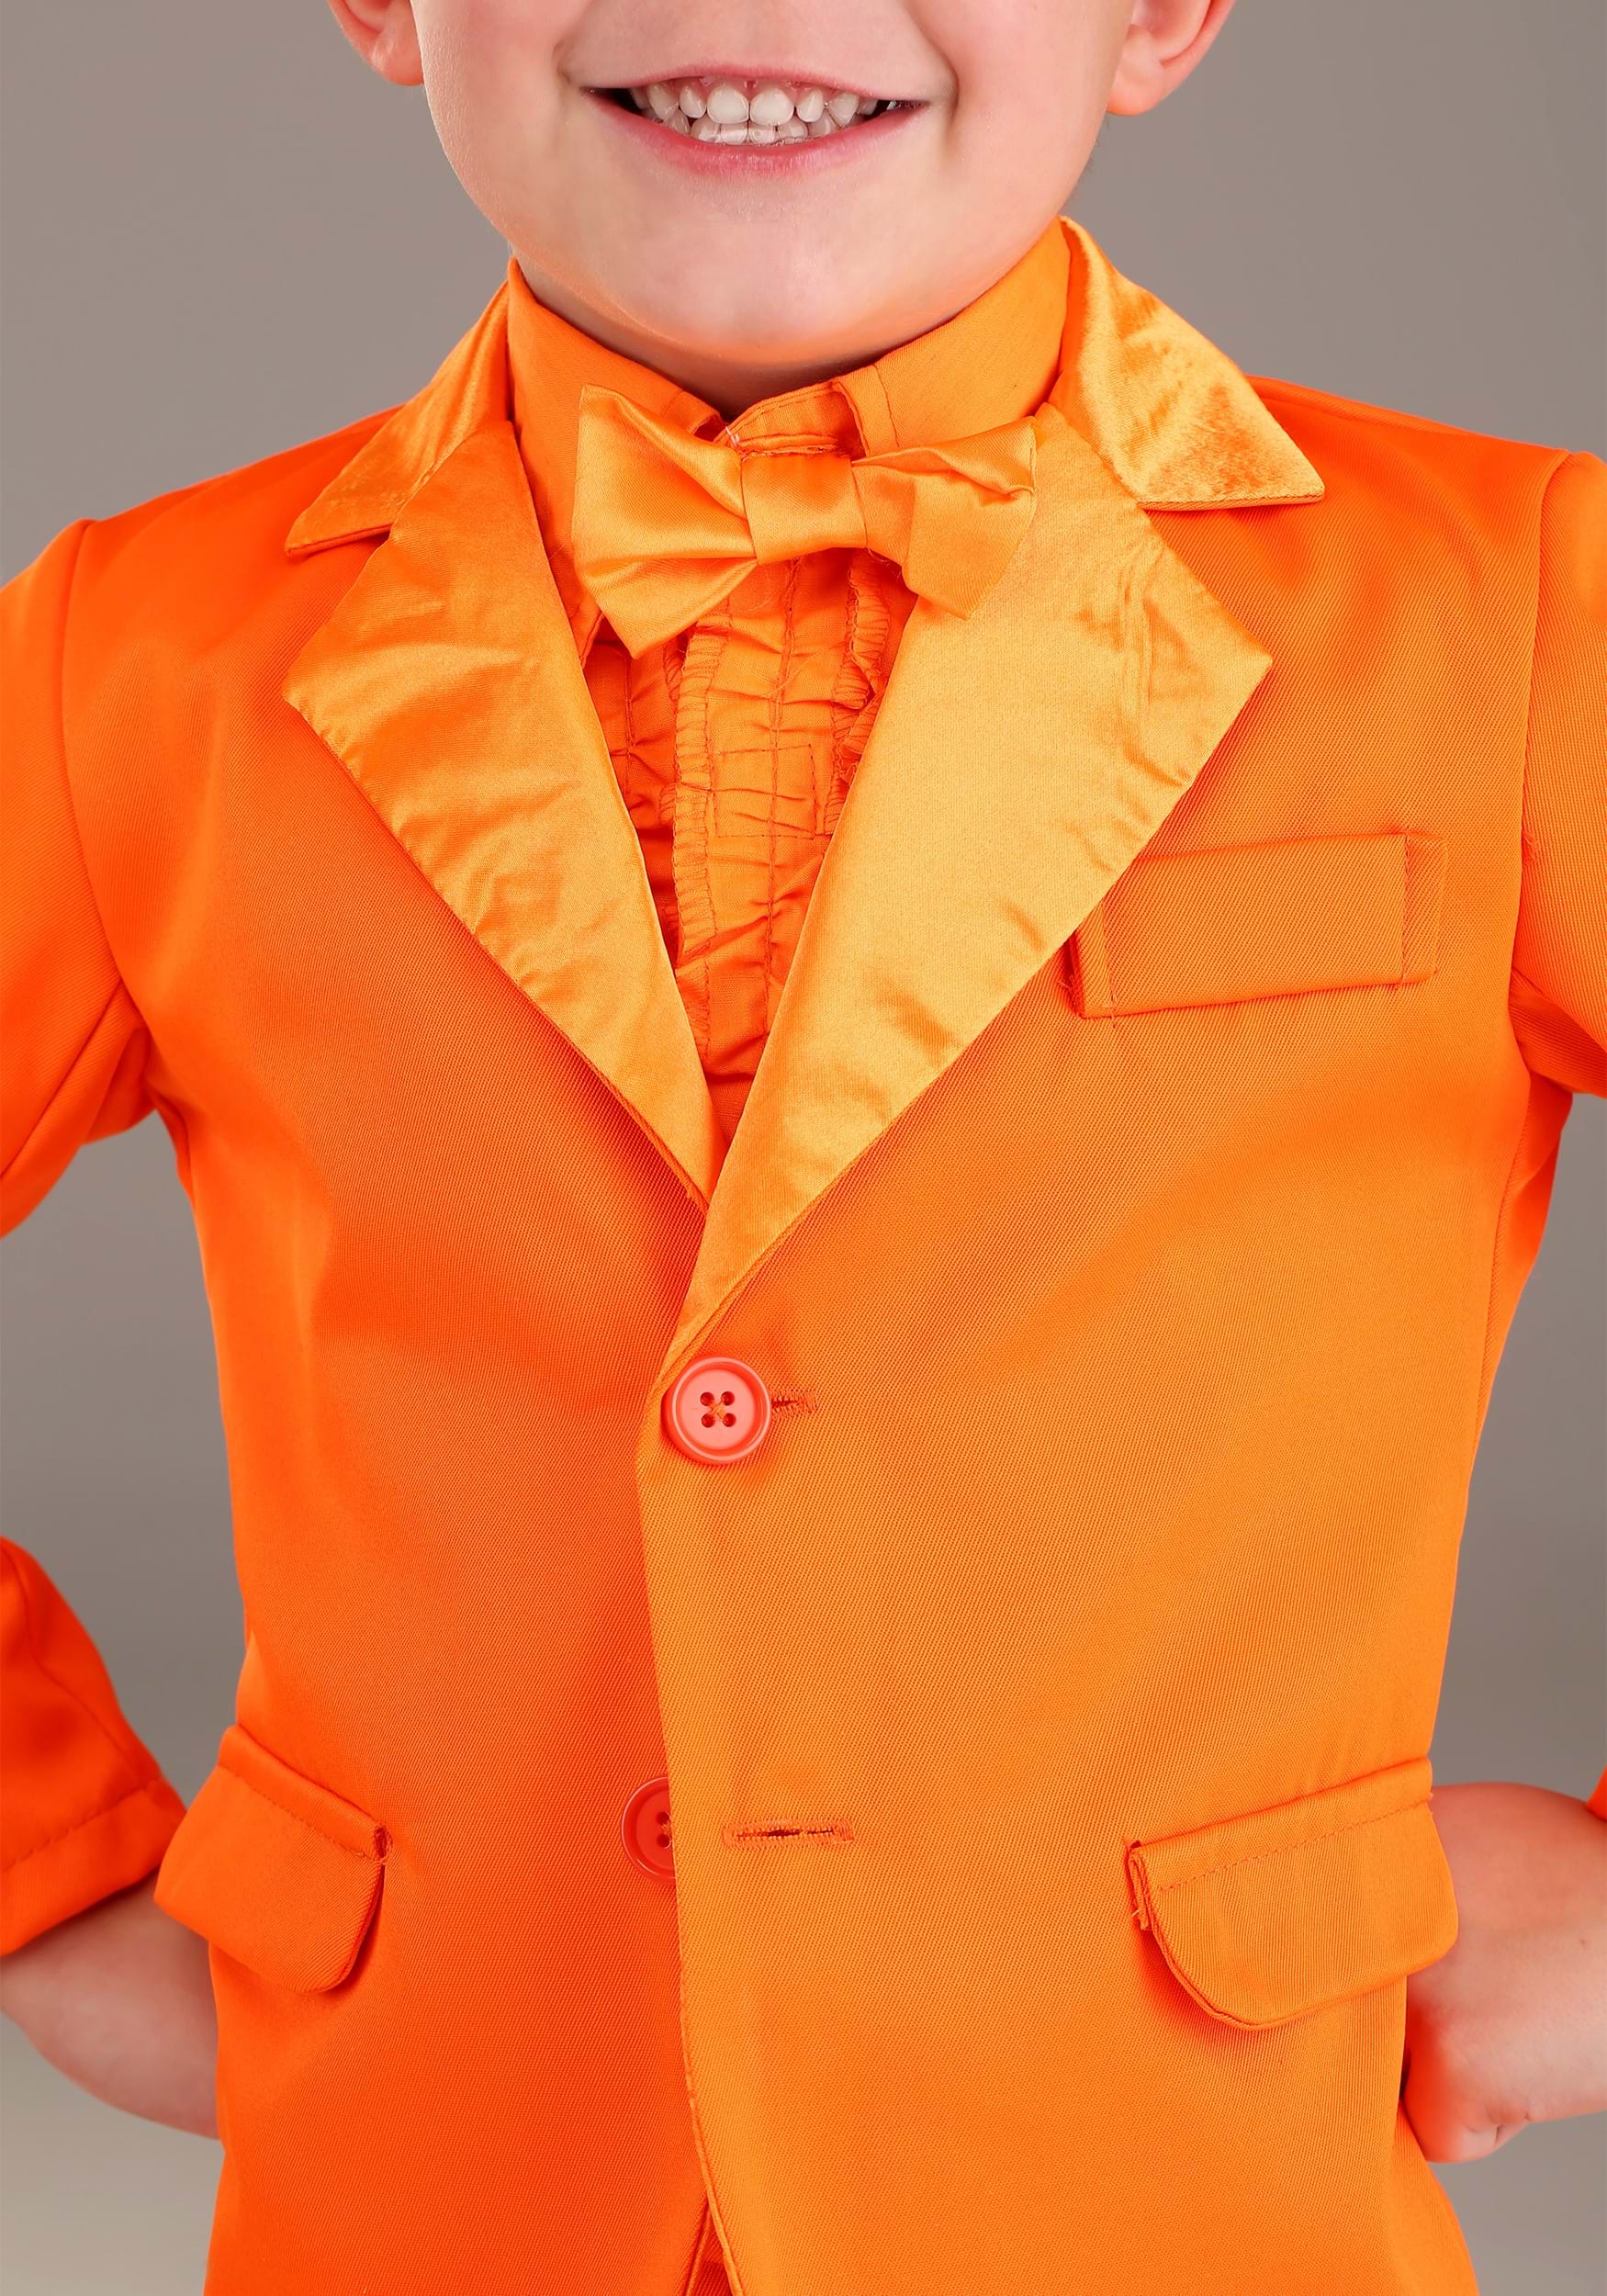 Orange Tuxedo Costume For Toddlers , Exclusive , Made By Us